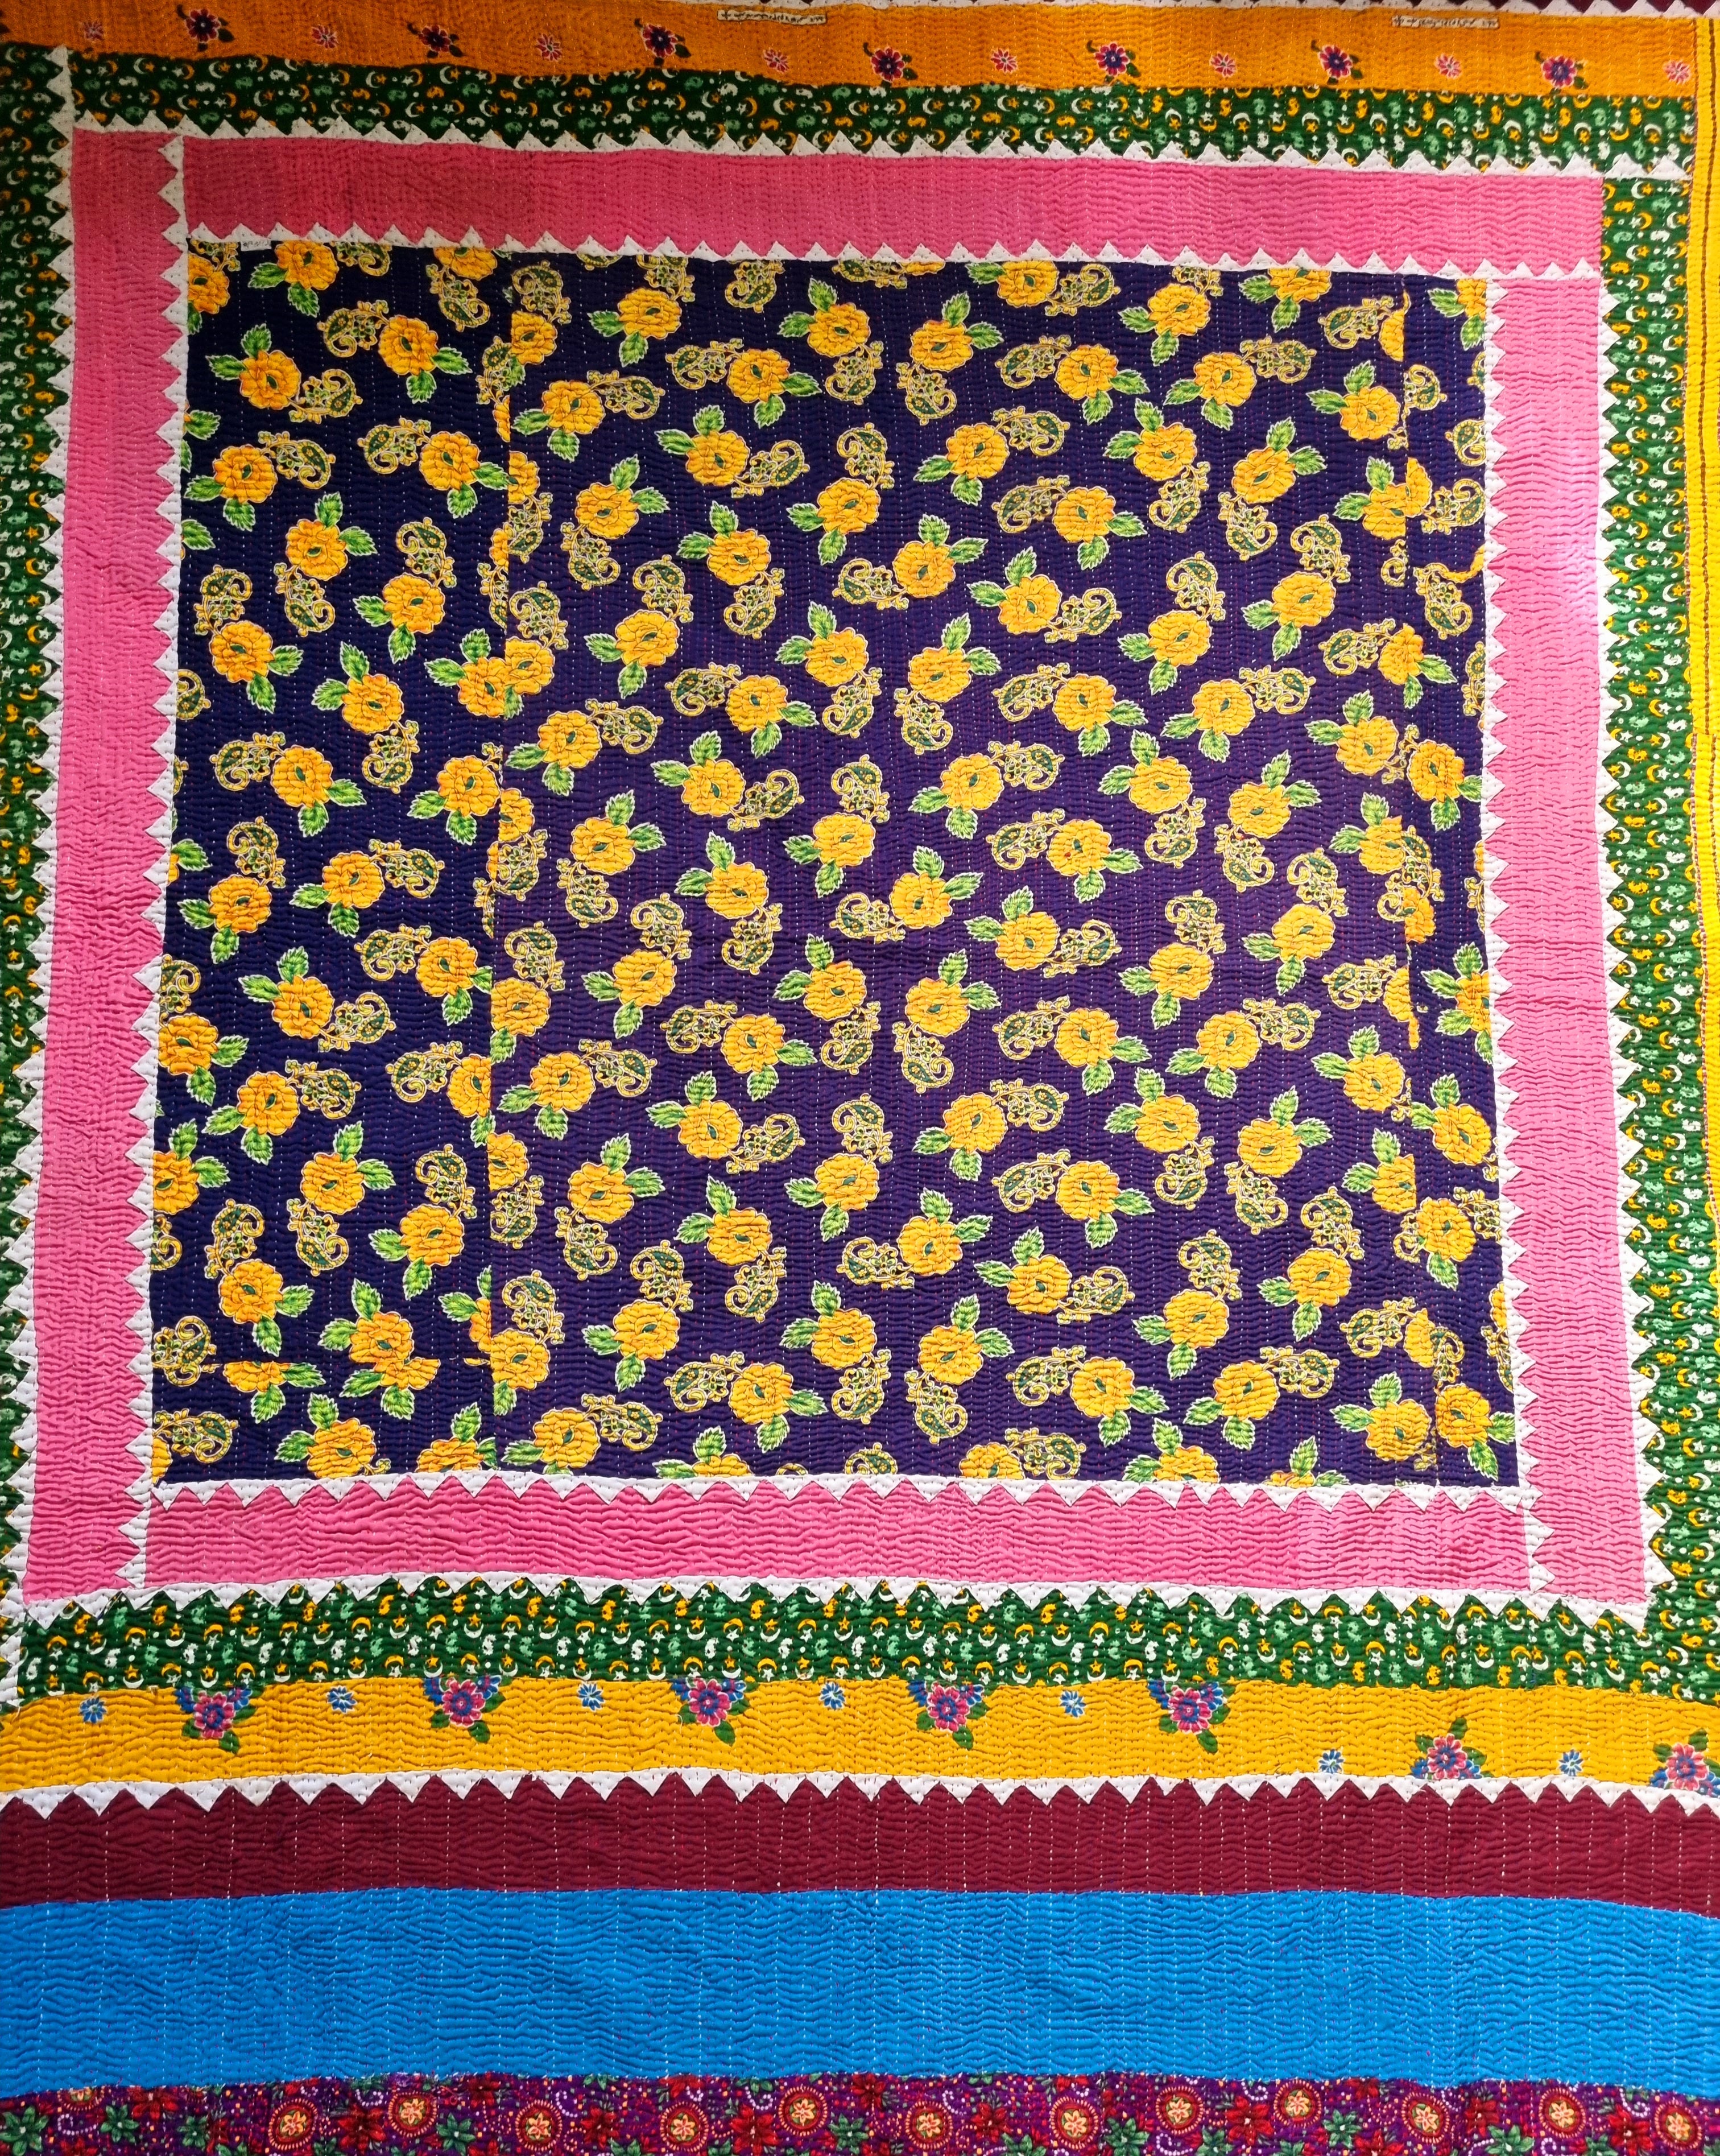 Vintage Pakistani kantha quilts - blue and yellow floral with moon and star border